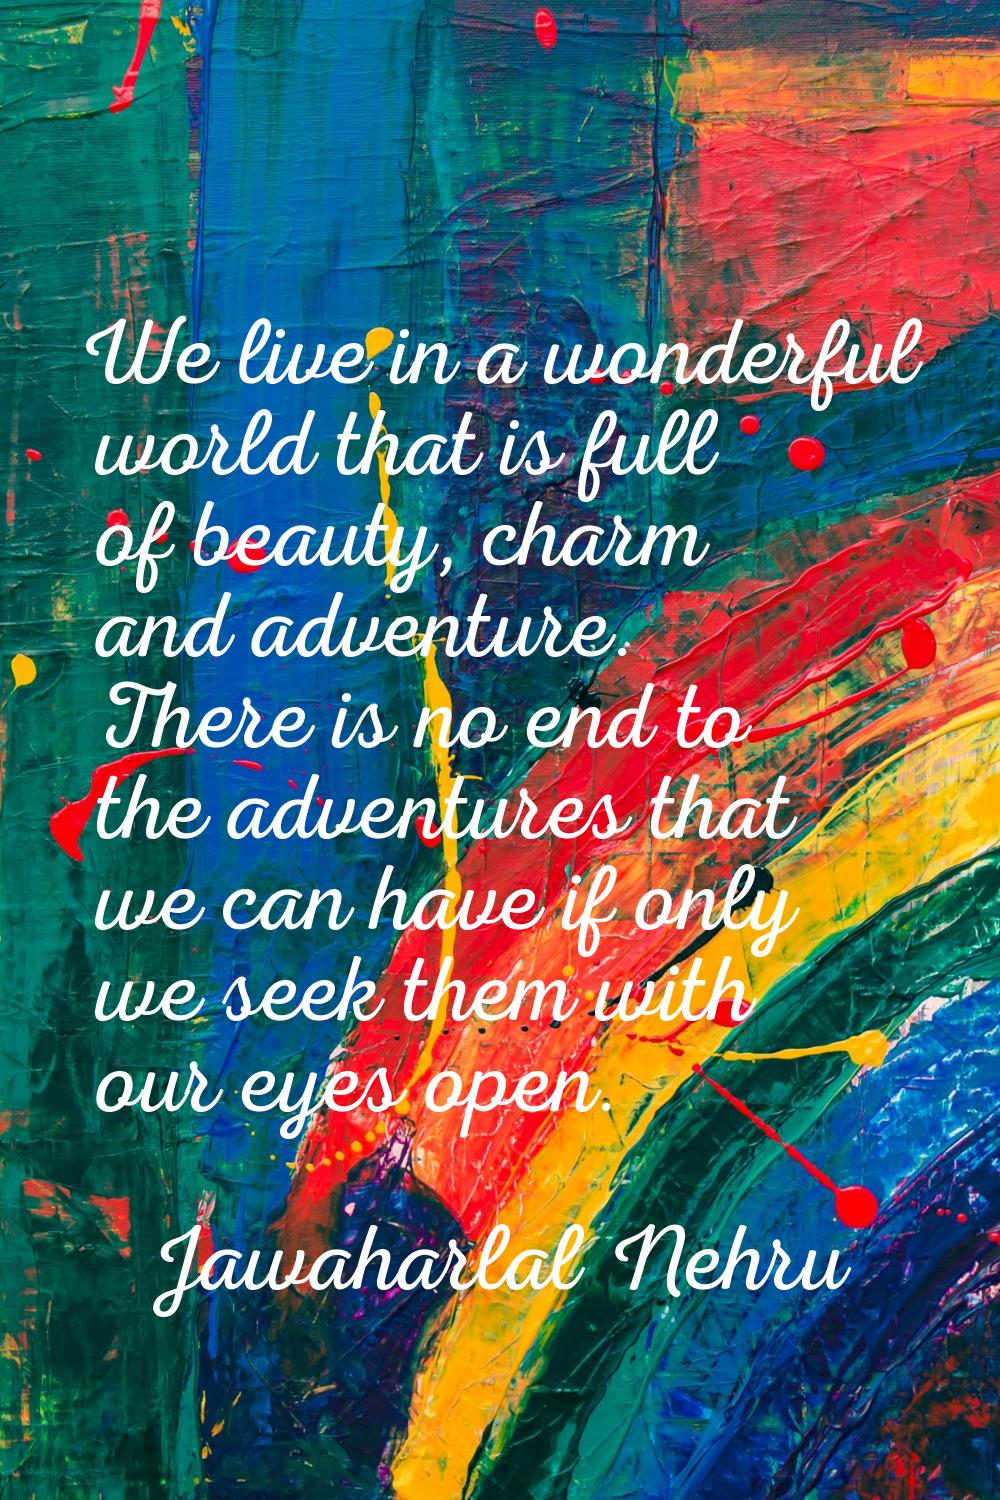 We live in a wonderful world that is full of beauty, charm and adventure. There is no end to the ad